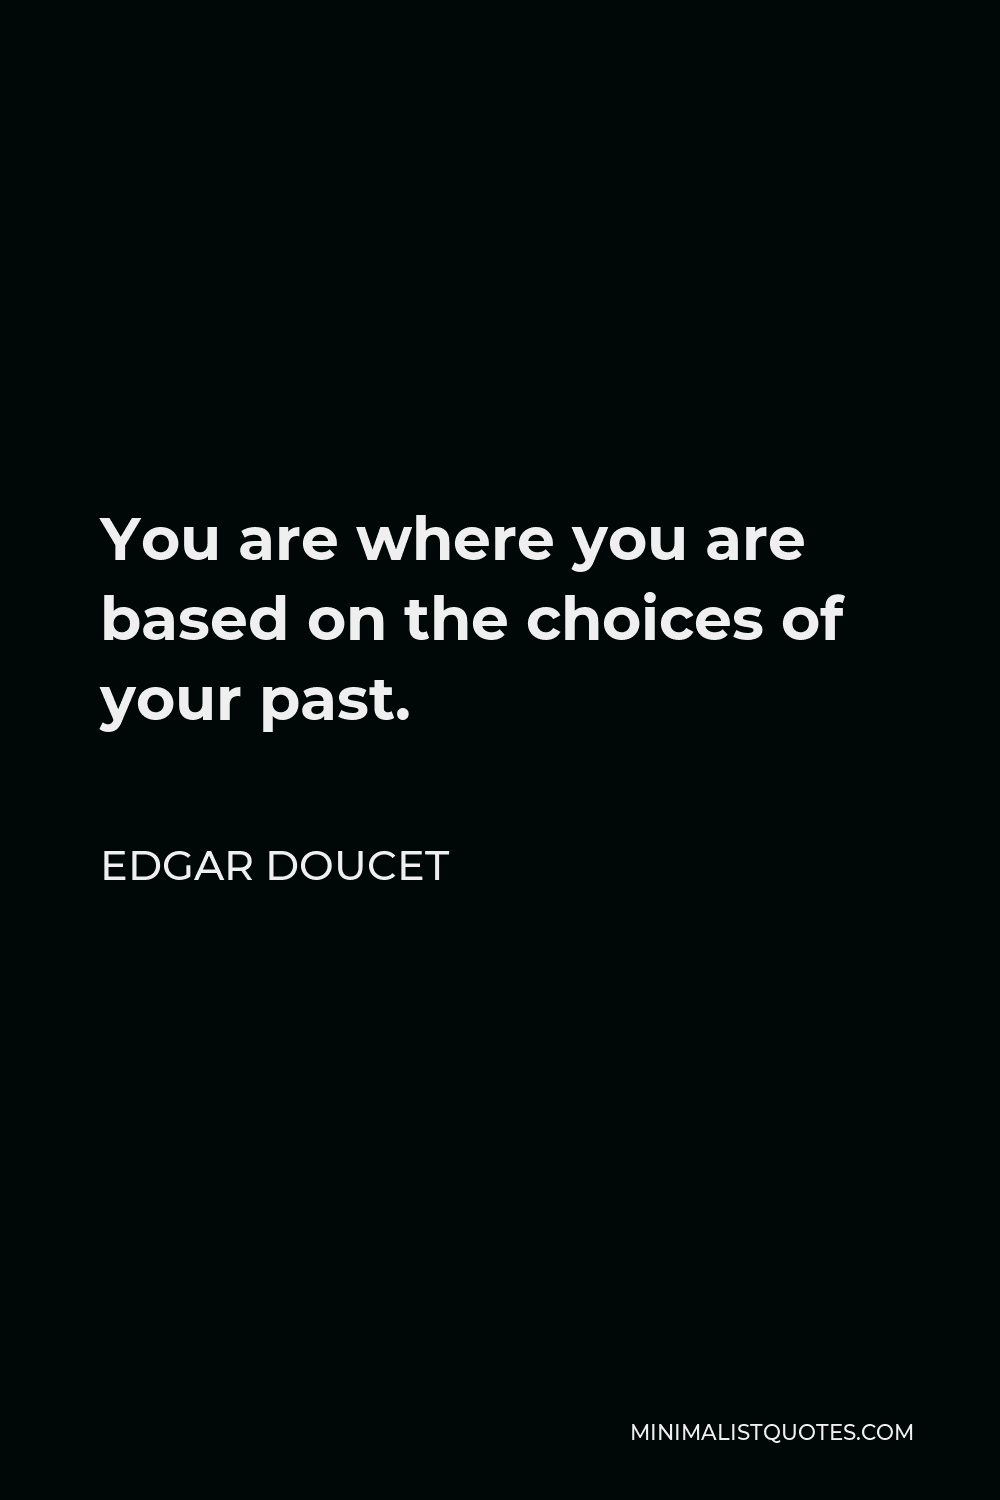 Edgar Doucet Quote - You are where you are based on the choices of your past.